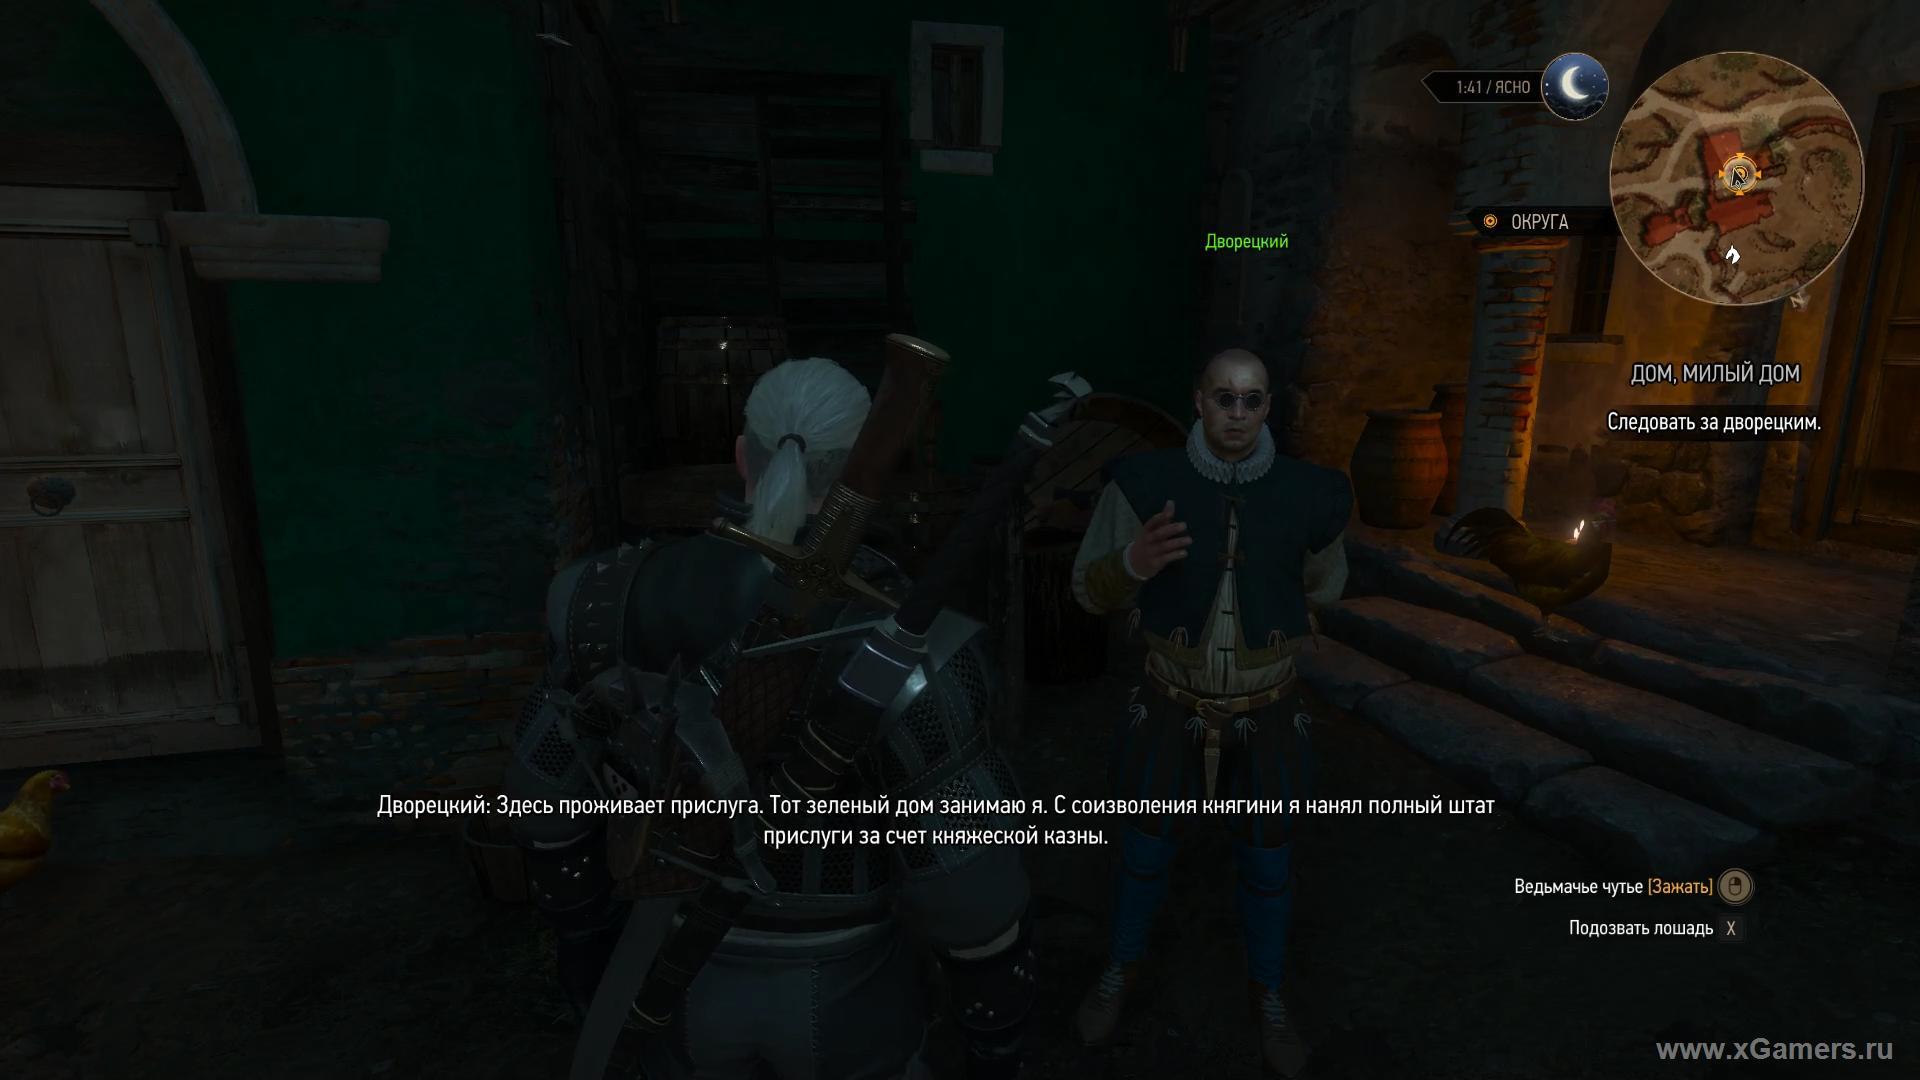 The Witcher Corvo Bianco: Review, and